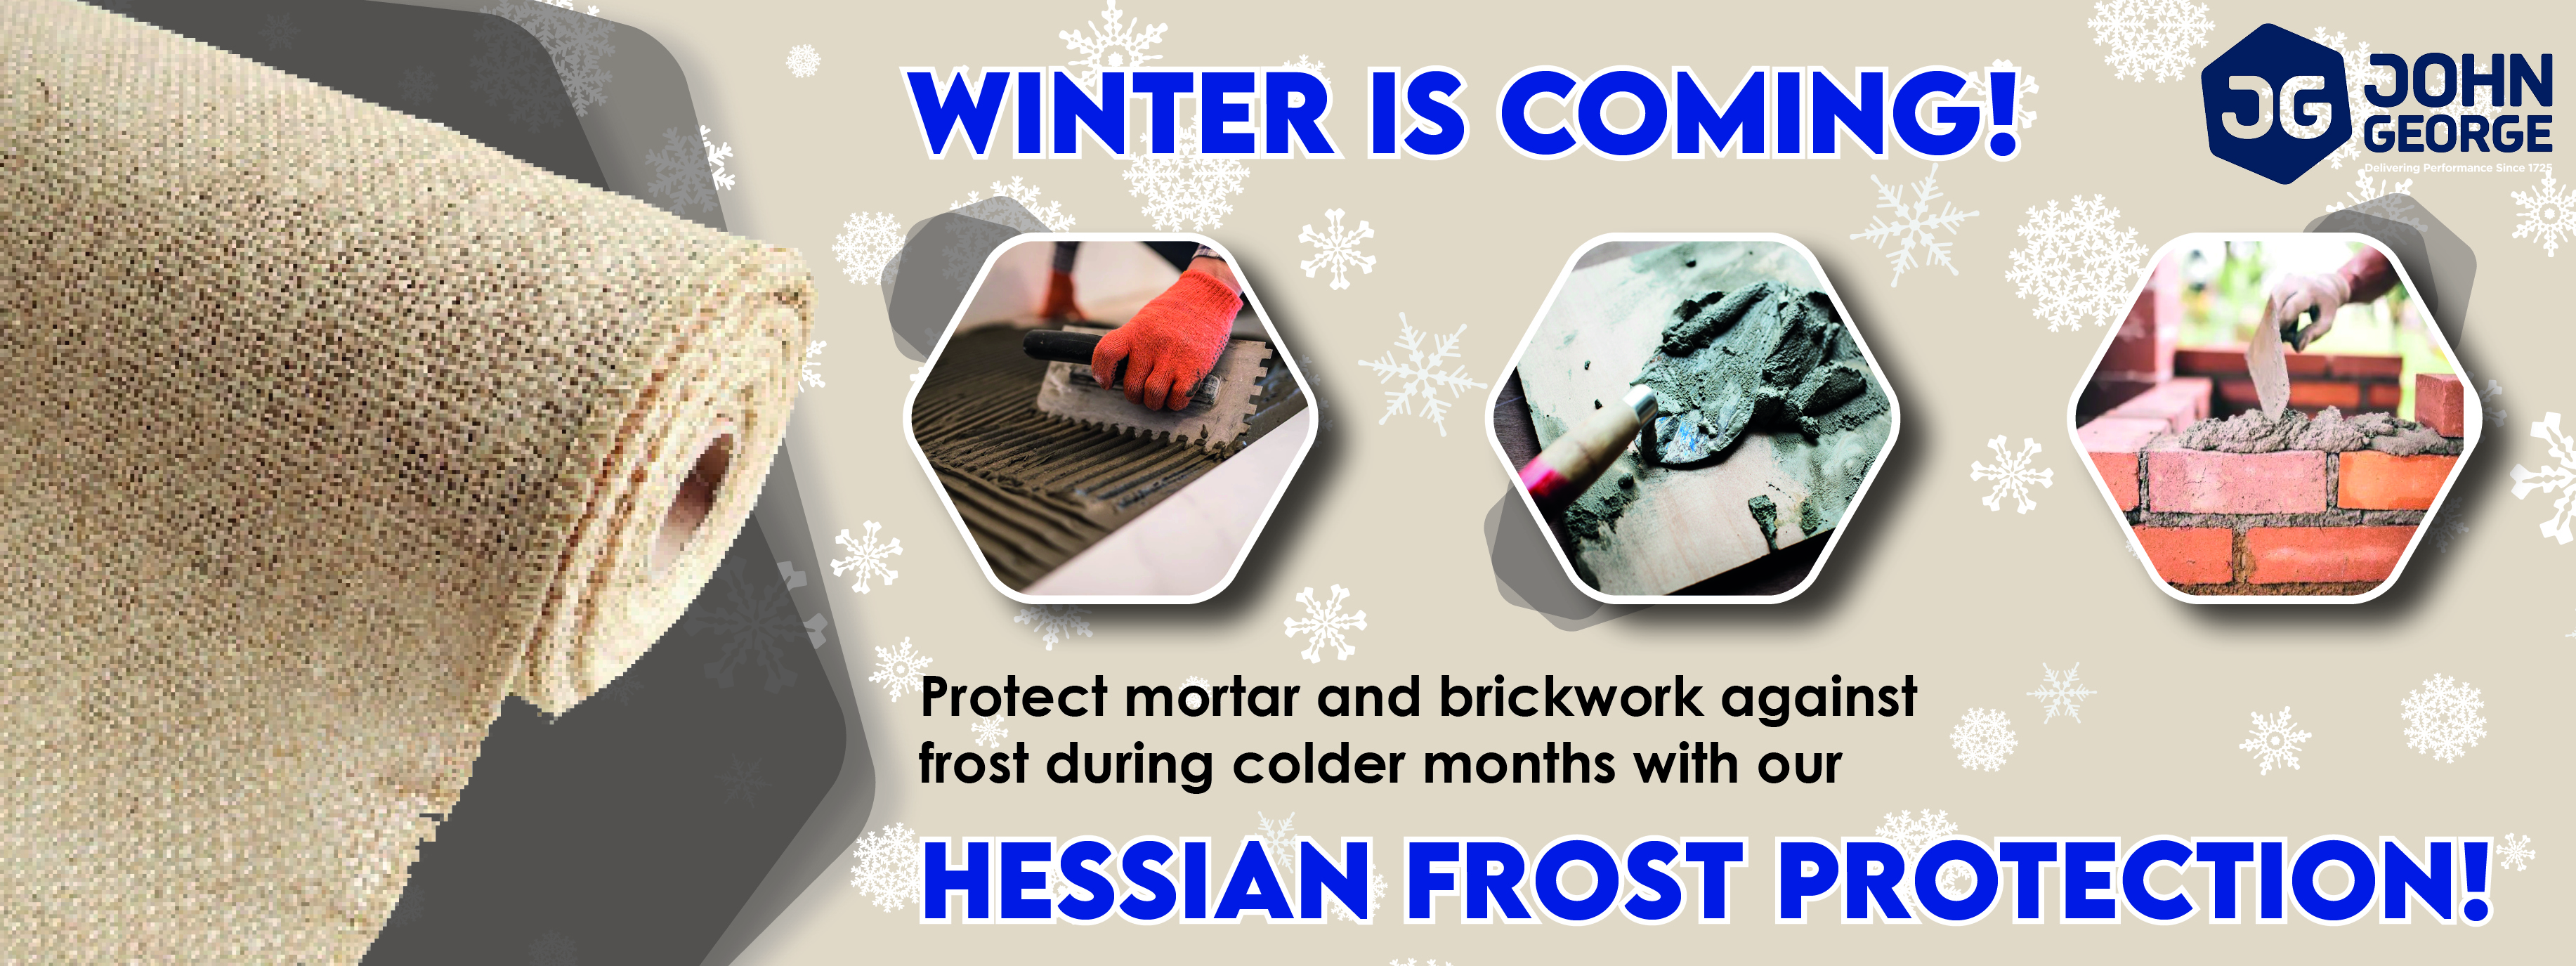 Hessian Frost Protection